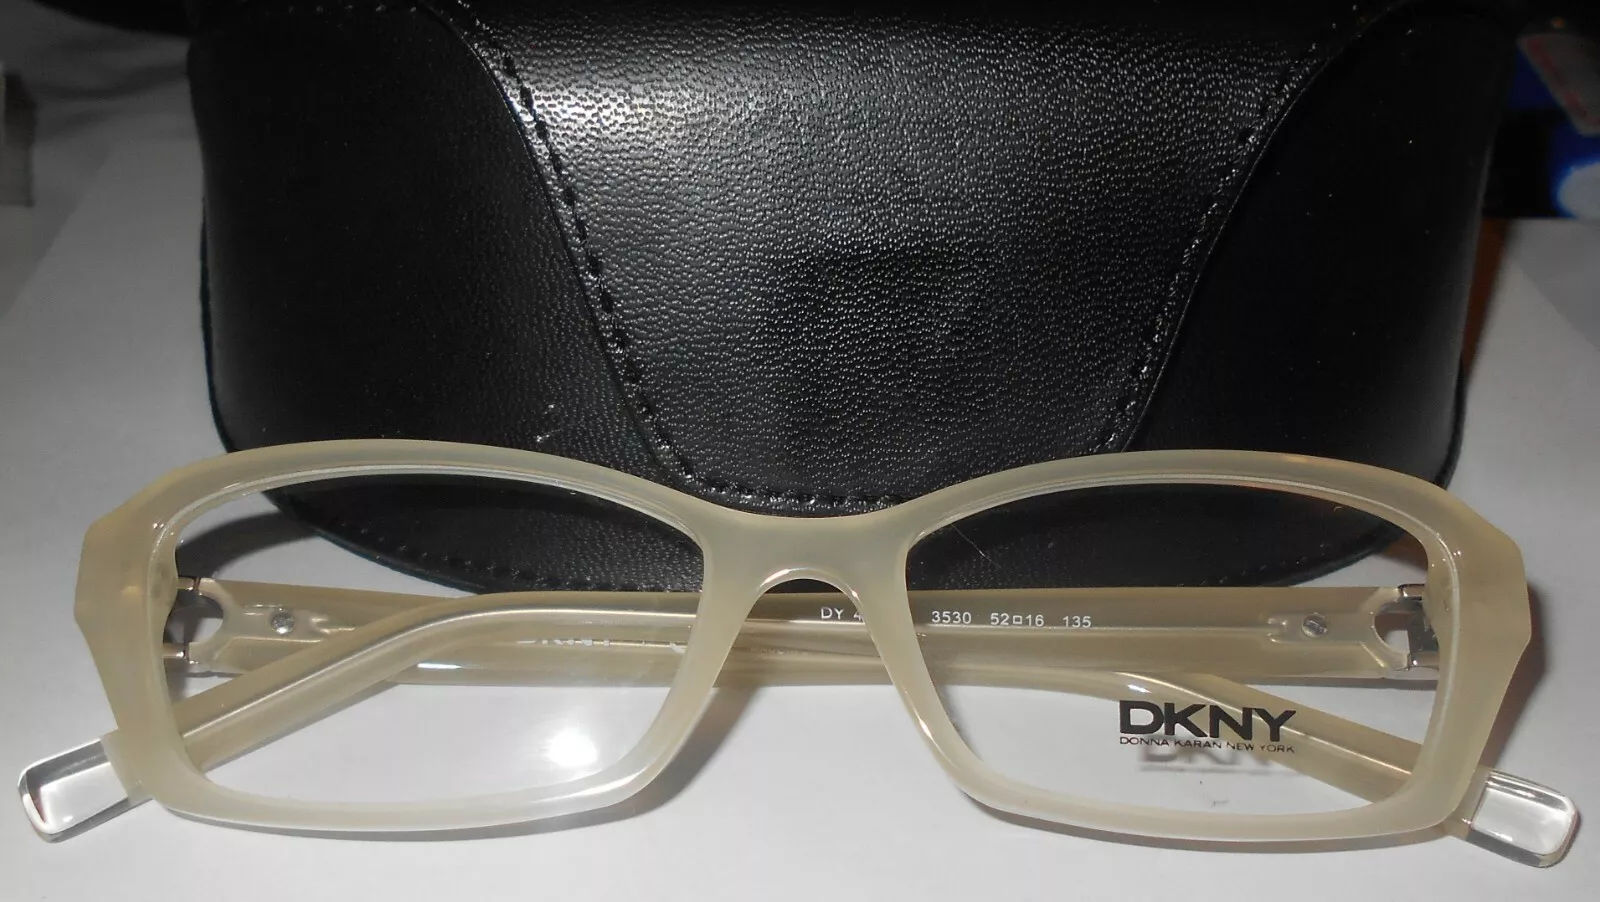 DNKY Glasses/Frames 4620B 3530 52 16 135 -new with case - brand new - $25.00